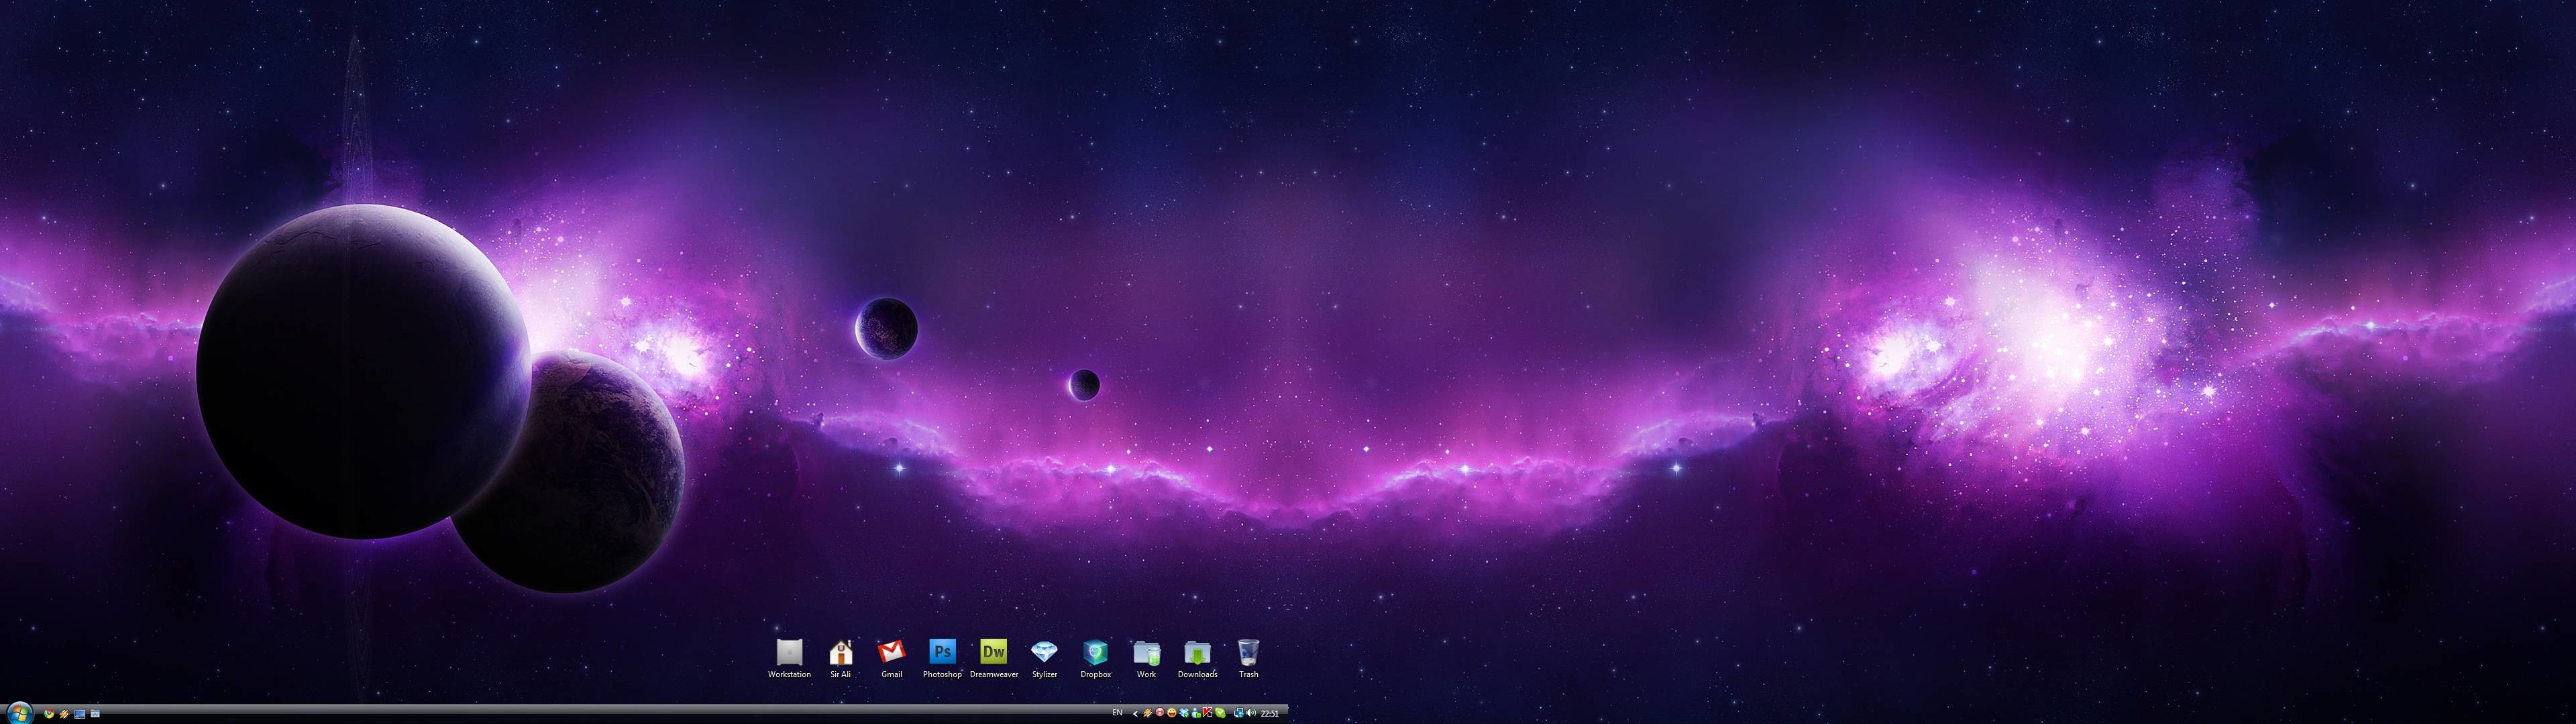 [3840×1080][REQUEST] Can anyone find the source image or remove the taskbar  and icons?